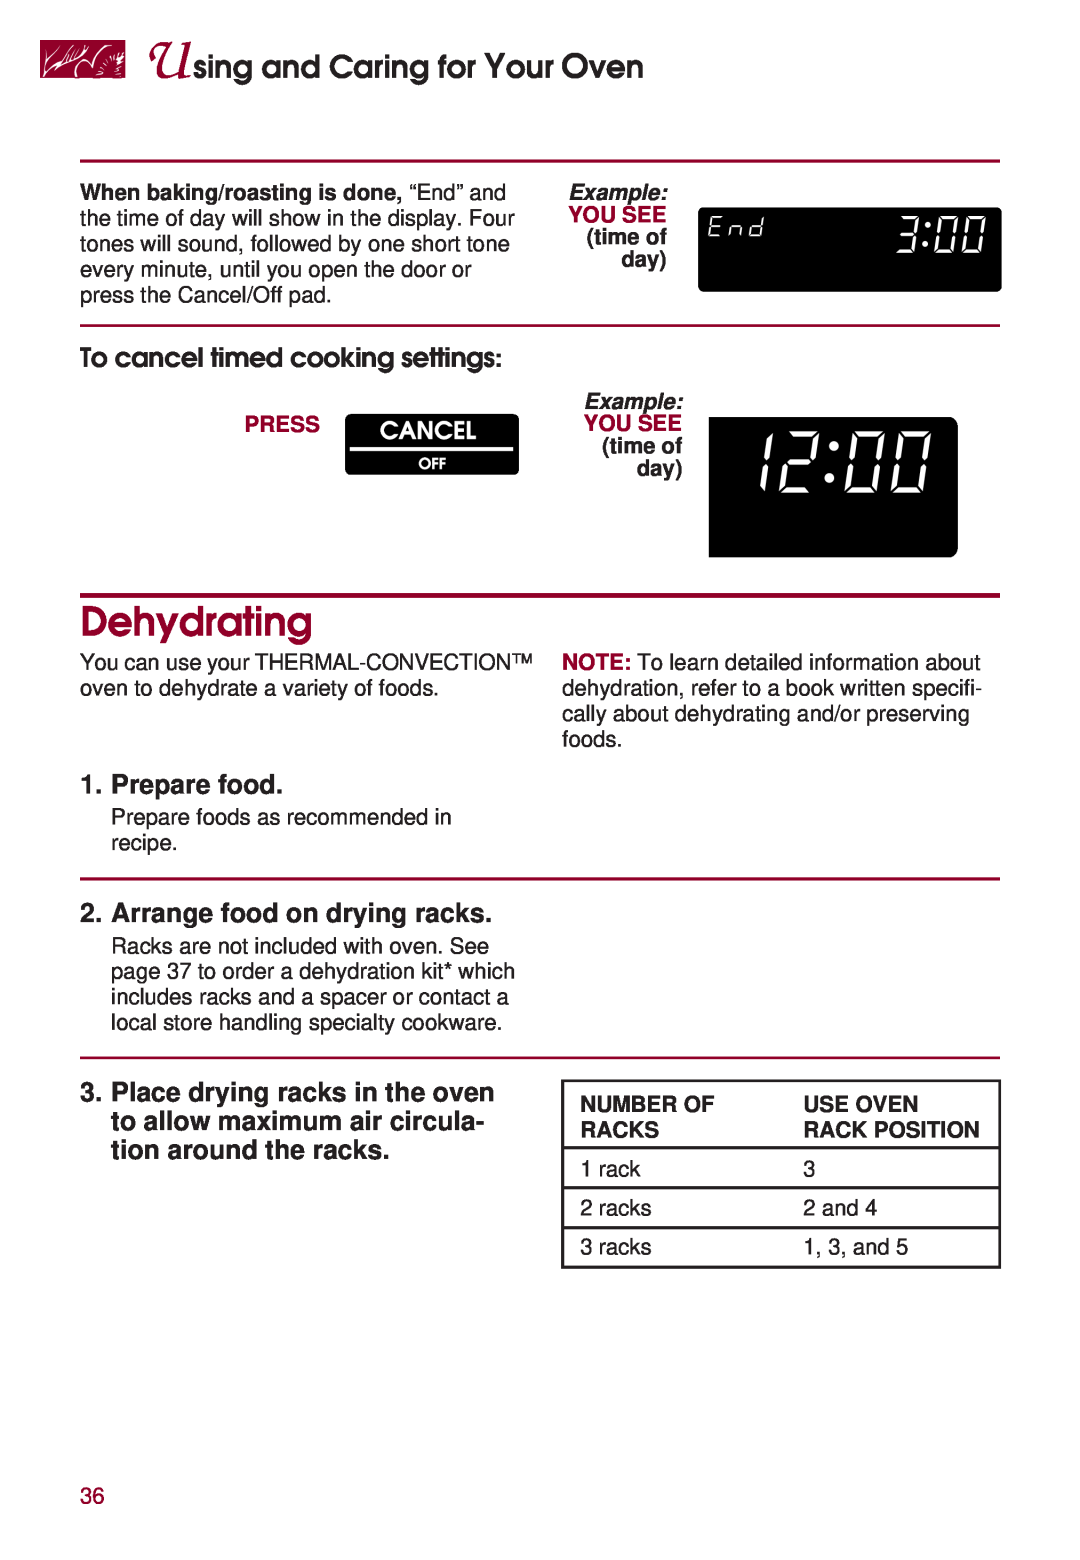 KitchenAid KERS507 Dehydrating, To cancel timed cooking settings, Prepare food, Arrange food on drying racks, Example 